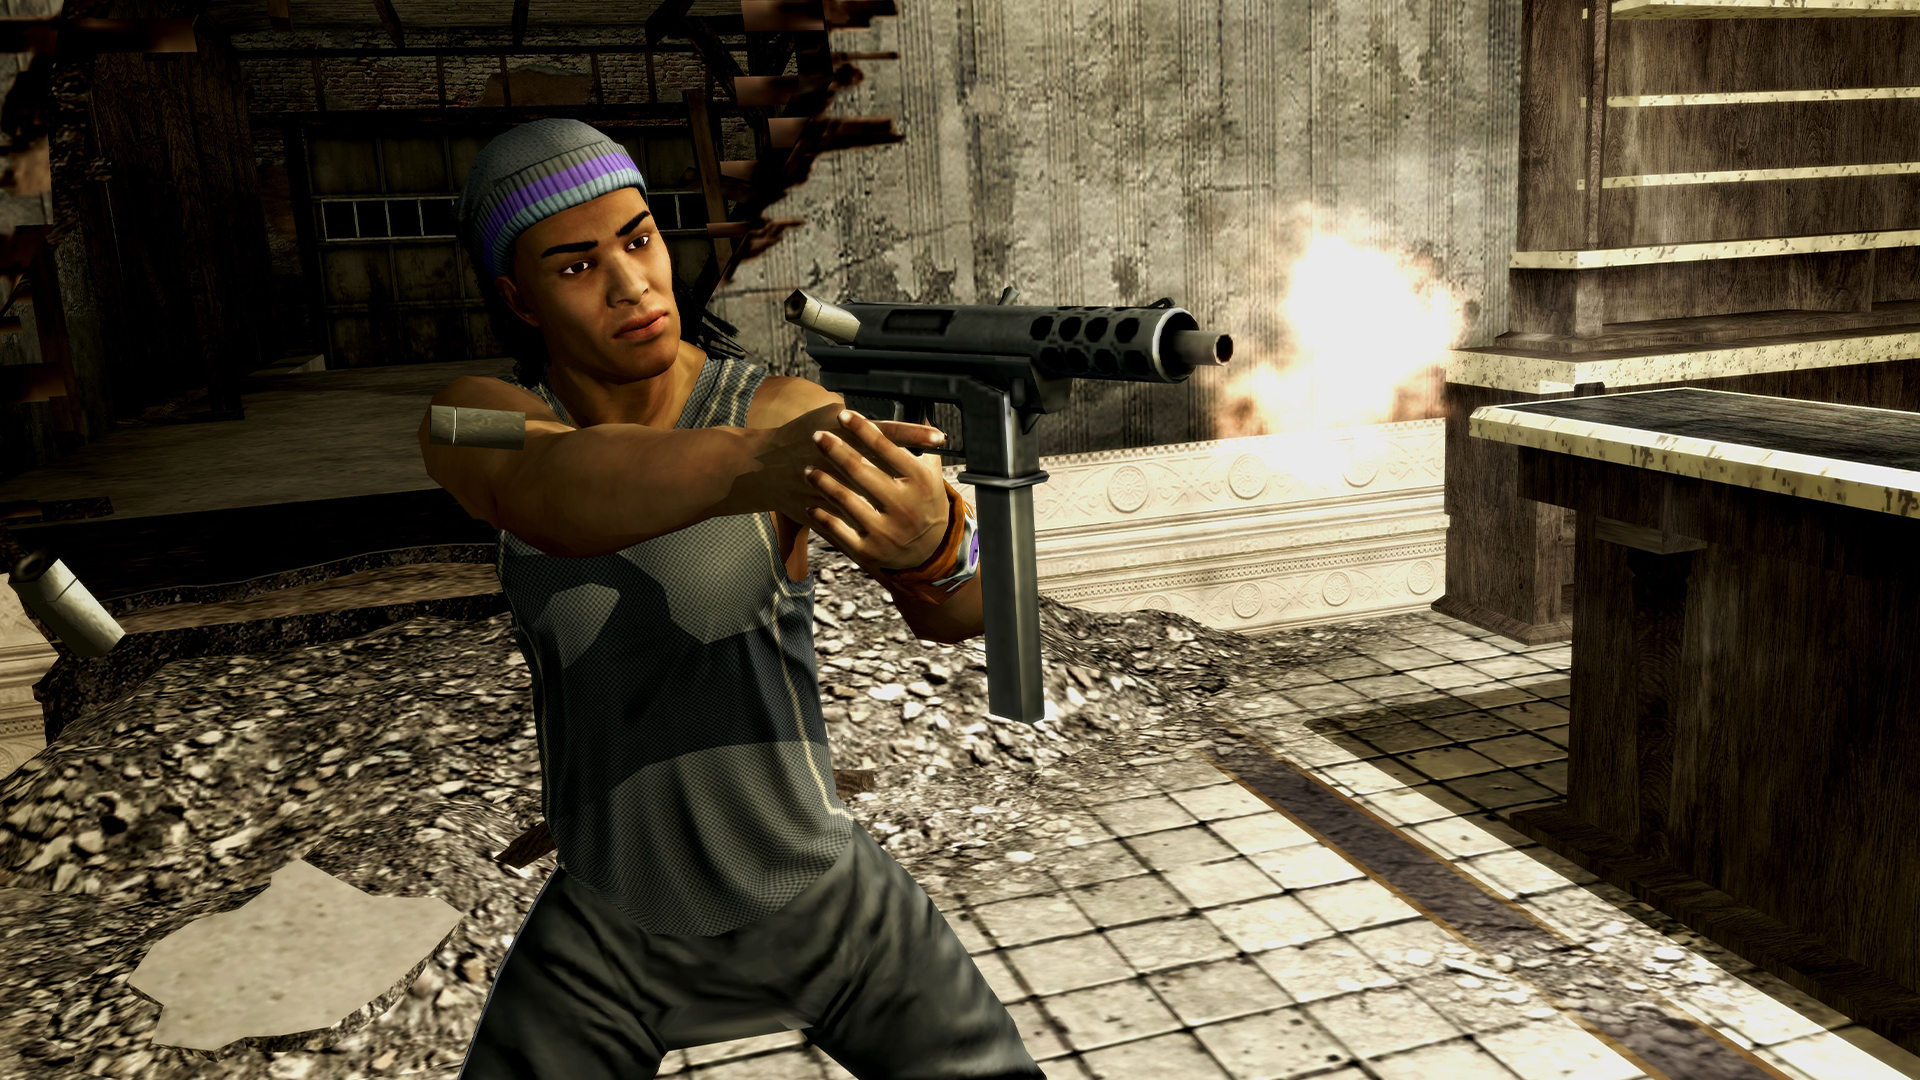 A decade later, Saints Row 2's bad PC port is finally getting fixed